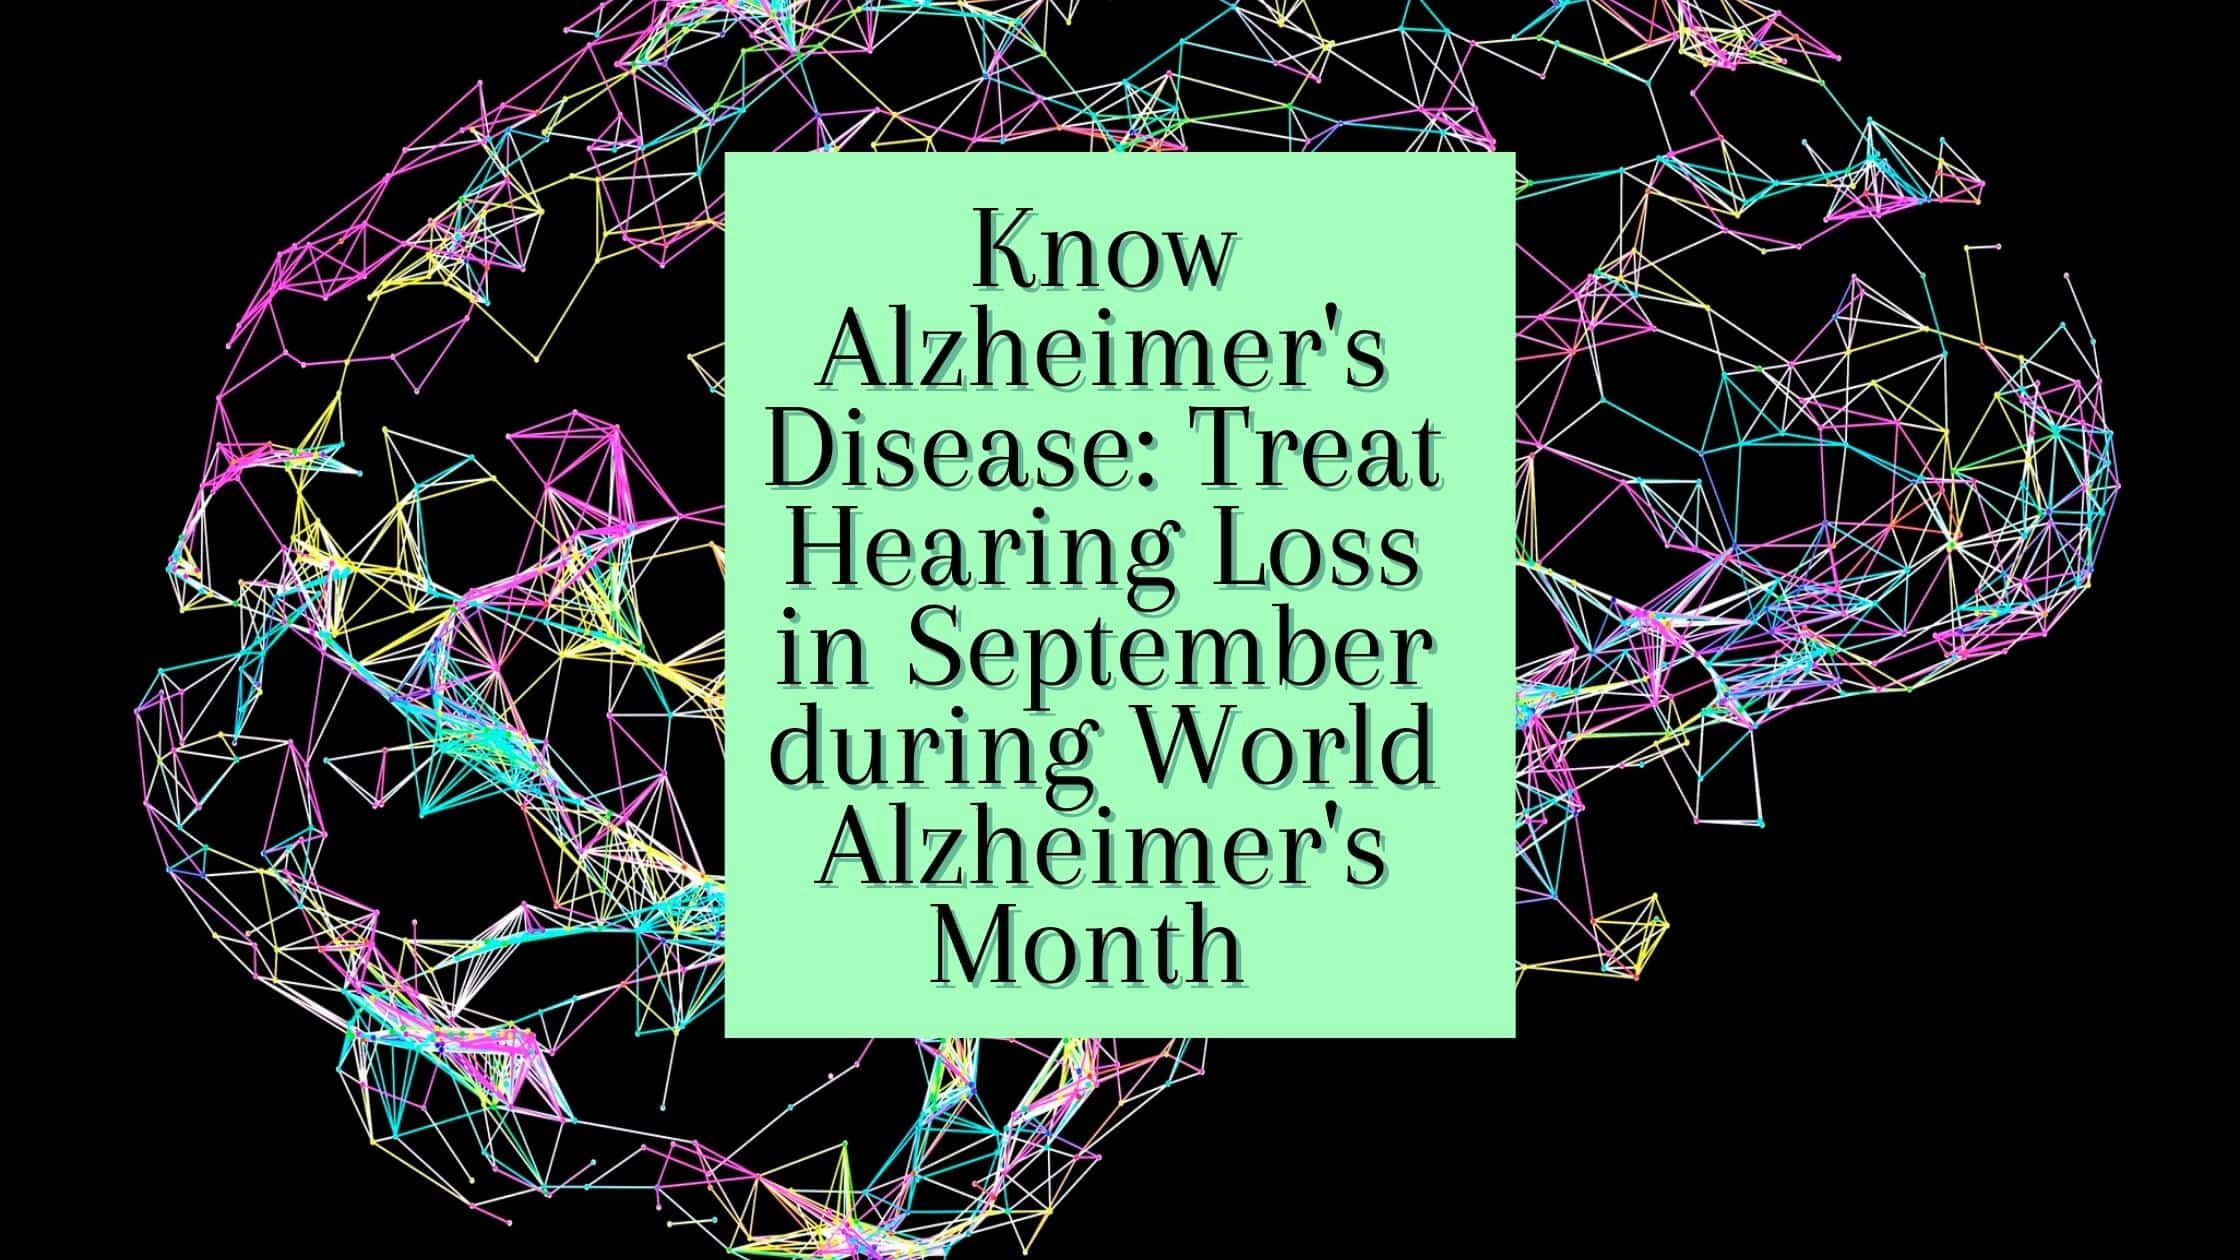 Featured image for “Know Alzheimer’s Disease: Treat Hearing Loss in September during World Alzheimer’s Month”